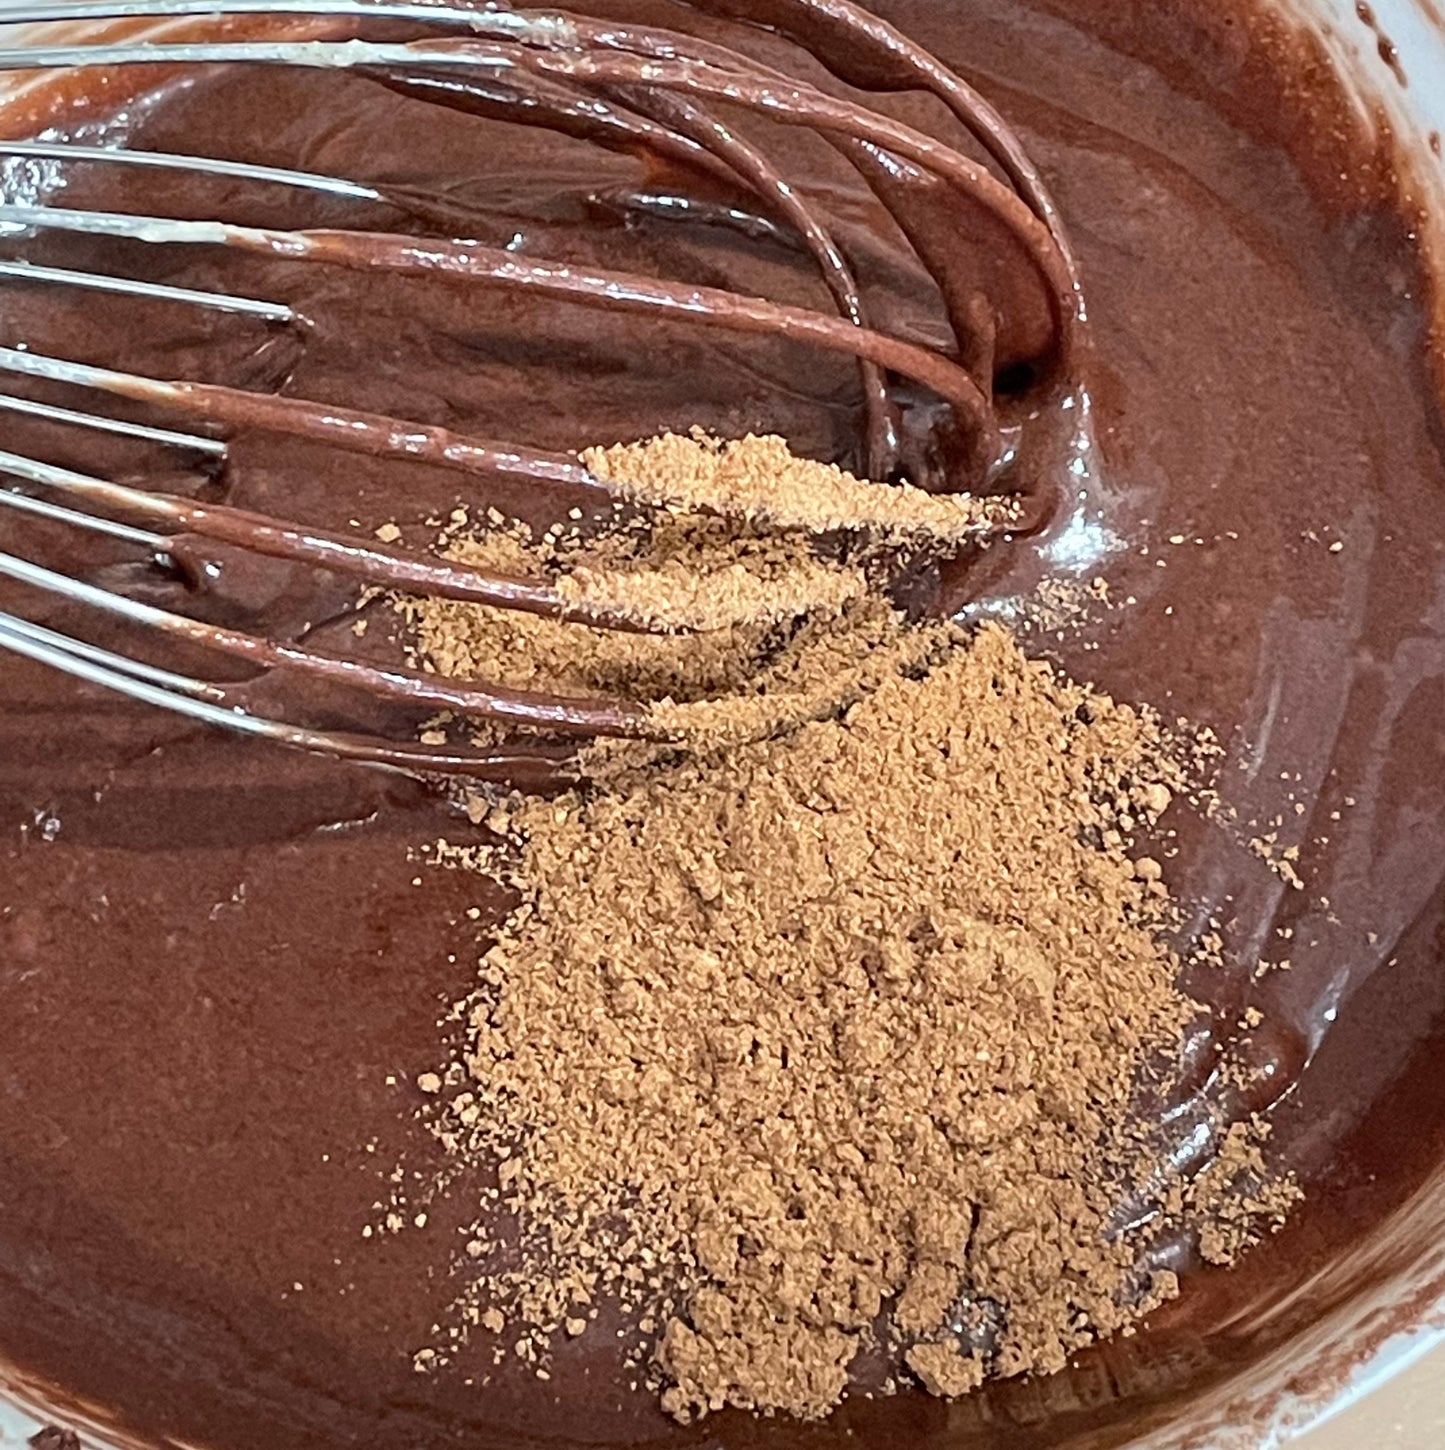 Adding gingerbread spice to cake batter